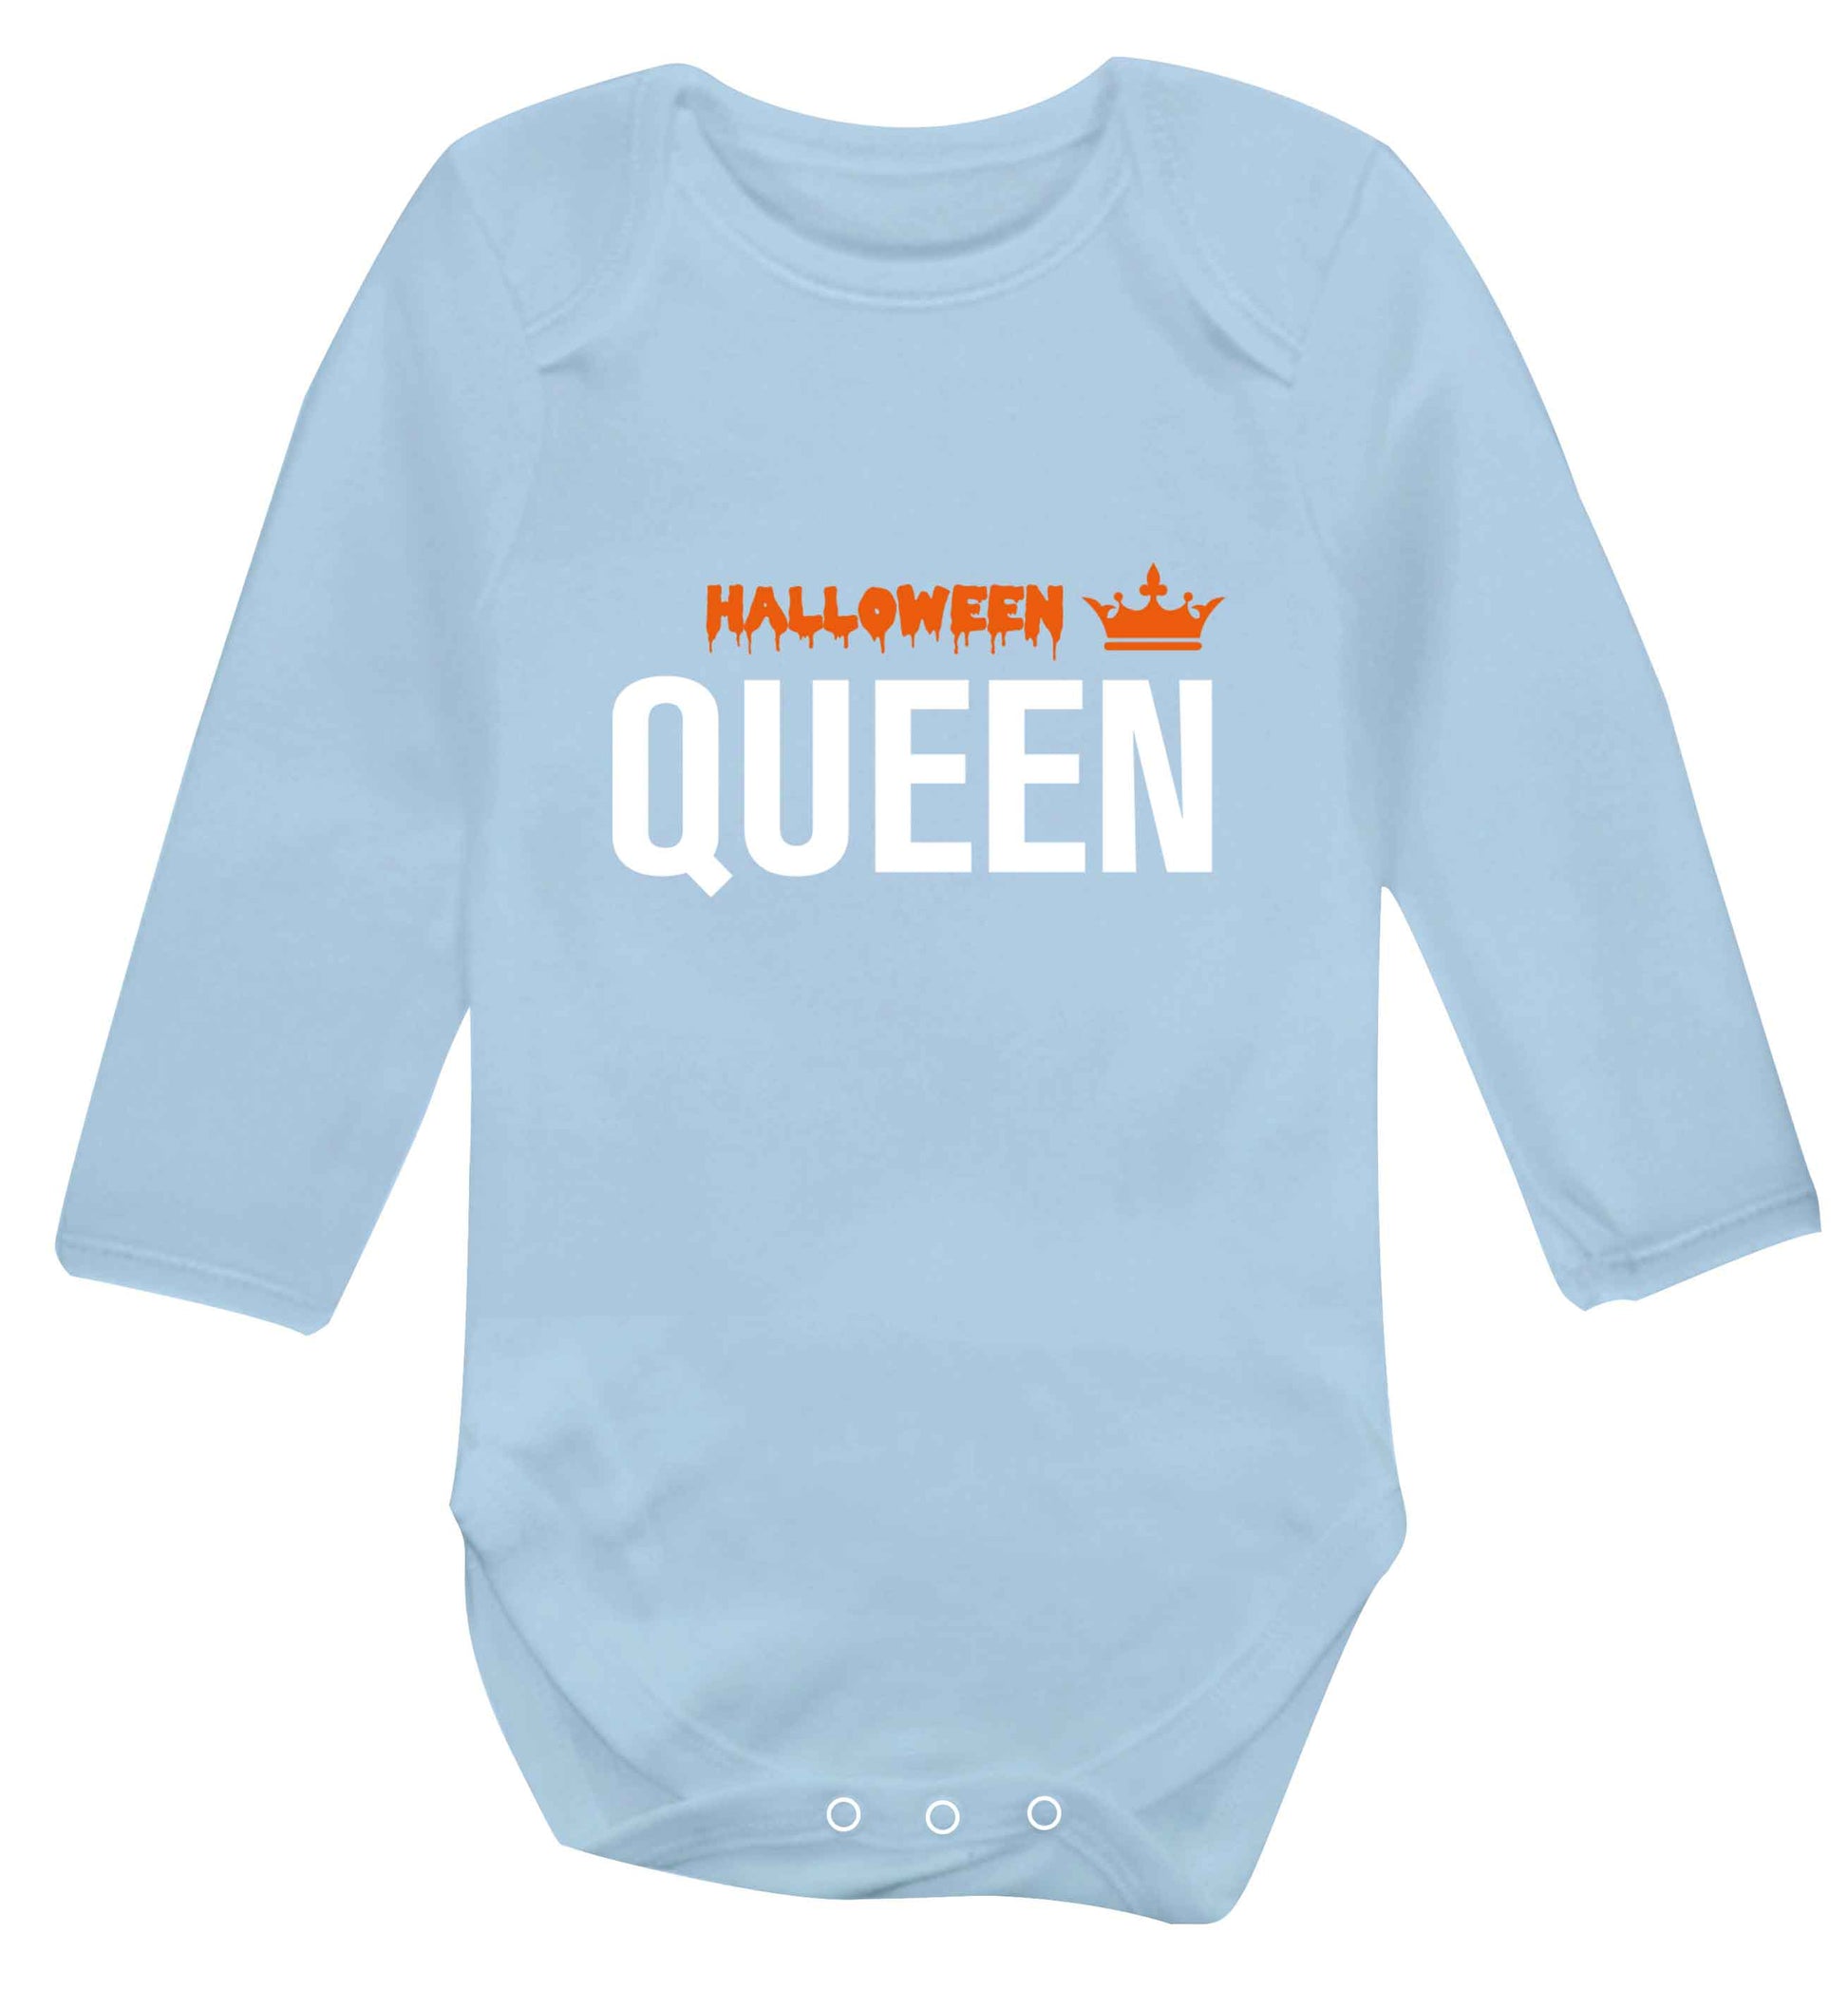 Halloween queen baby vest long sleeved pale blue 6-12 months